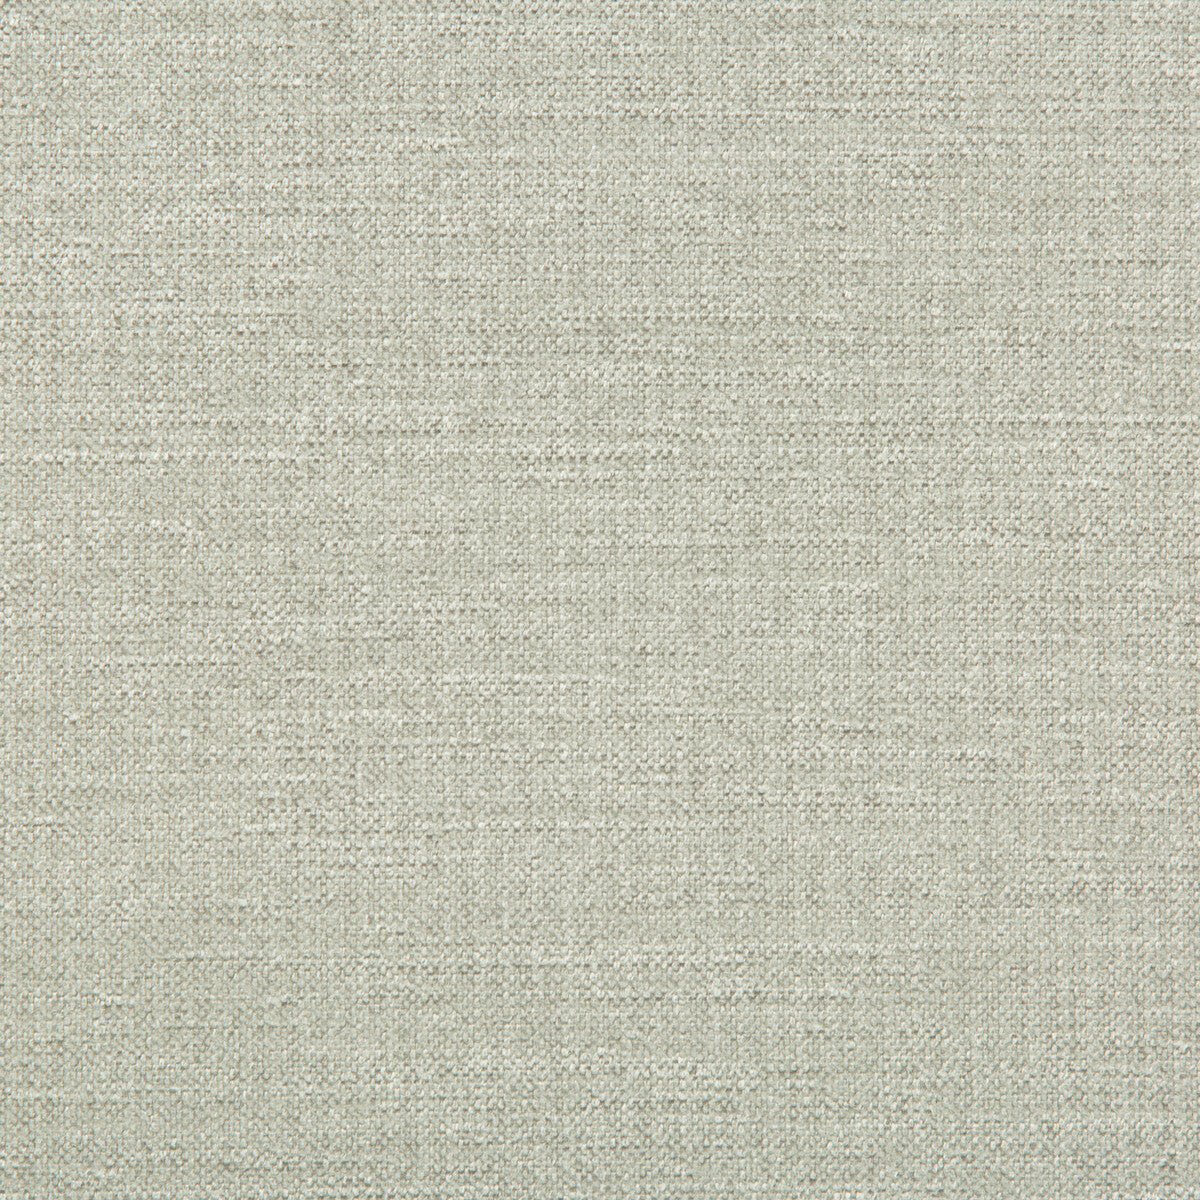 Kravet Smart fabric in 33831-1101 color - pattern 33831.1101.0 - by Kravet Smart in the Performance Crypton Home collection